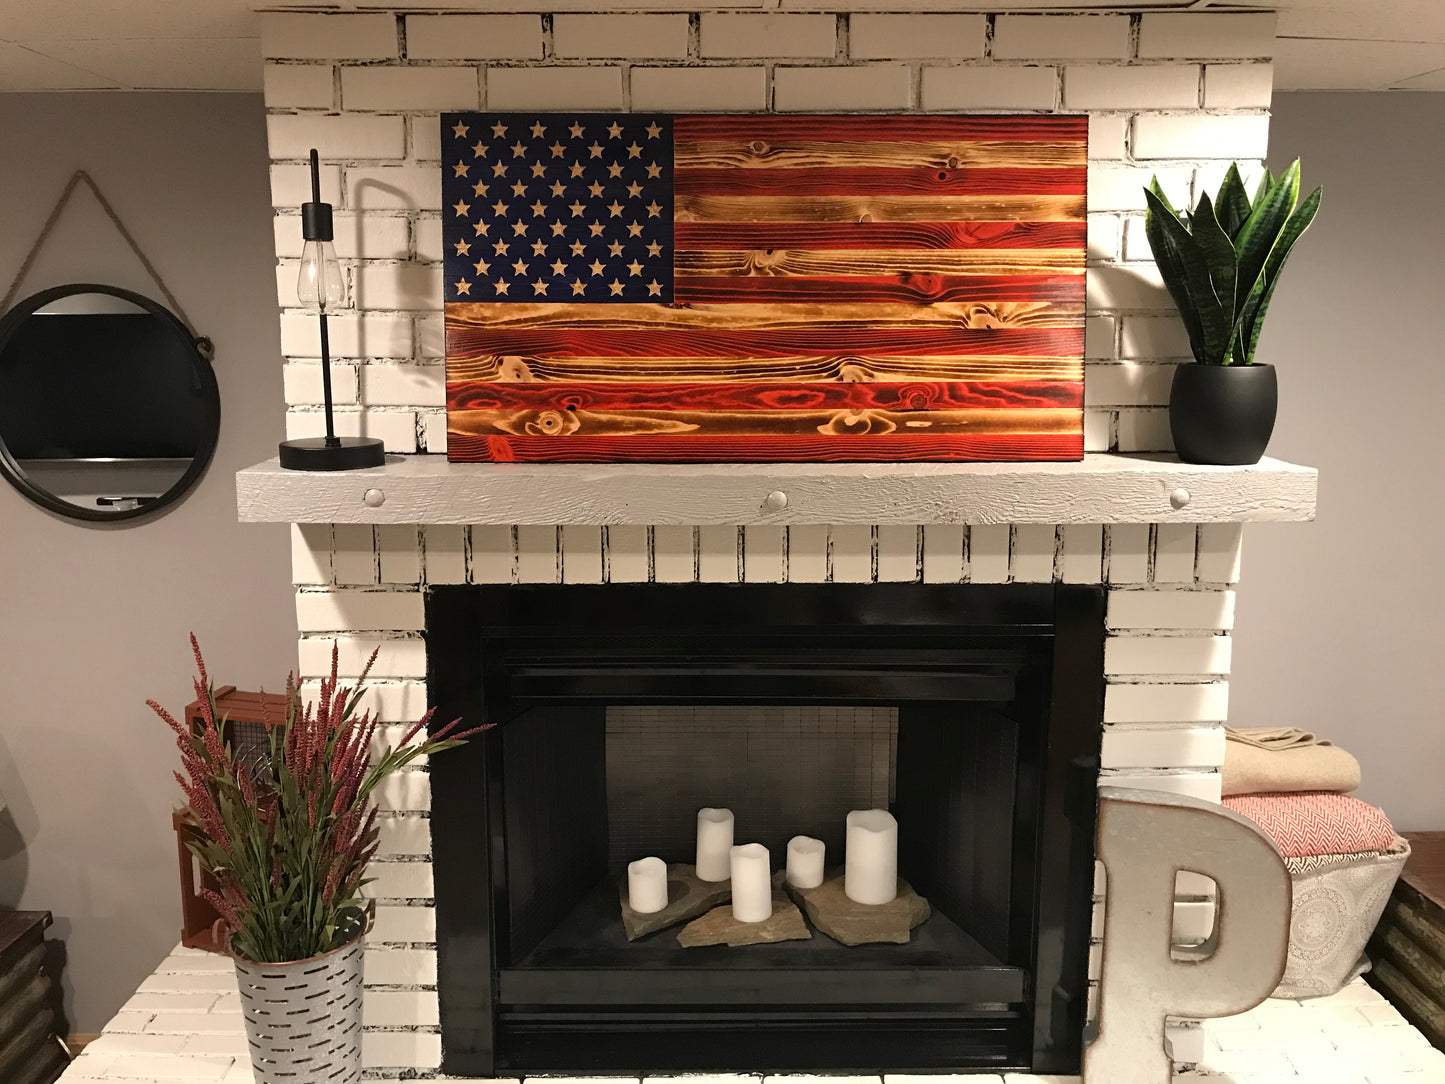 "We the People" The Natural American Wooden Flag, Rustic Decor, Wood Flag, Handcrafted Rustic Flag, Veteran Made